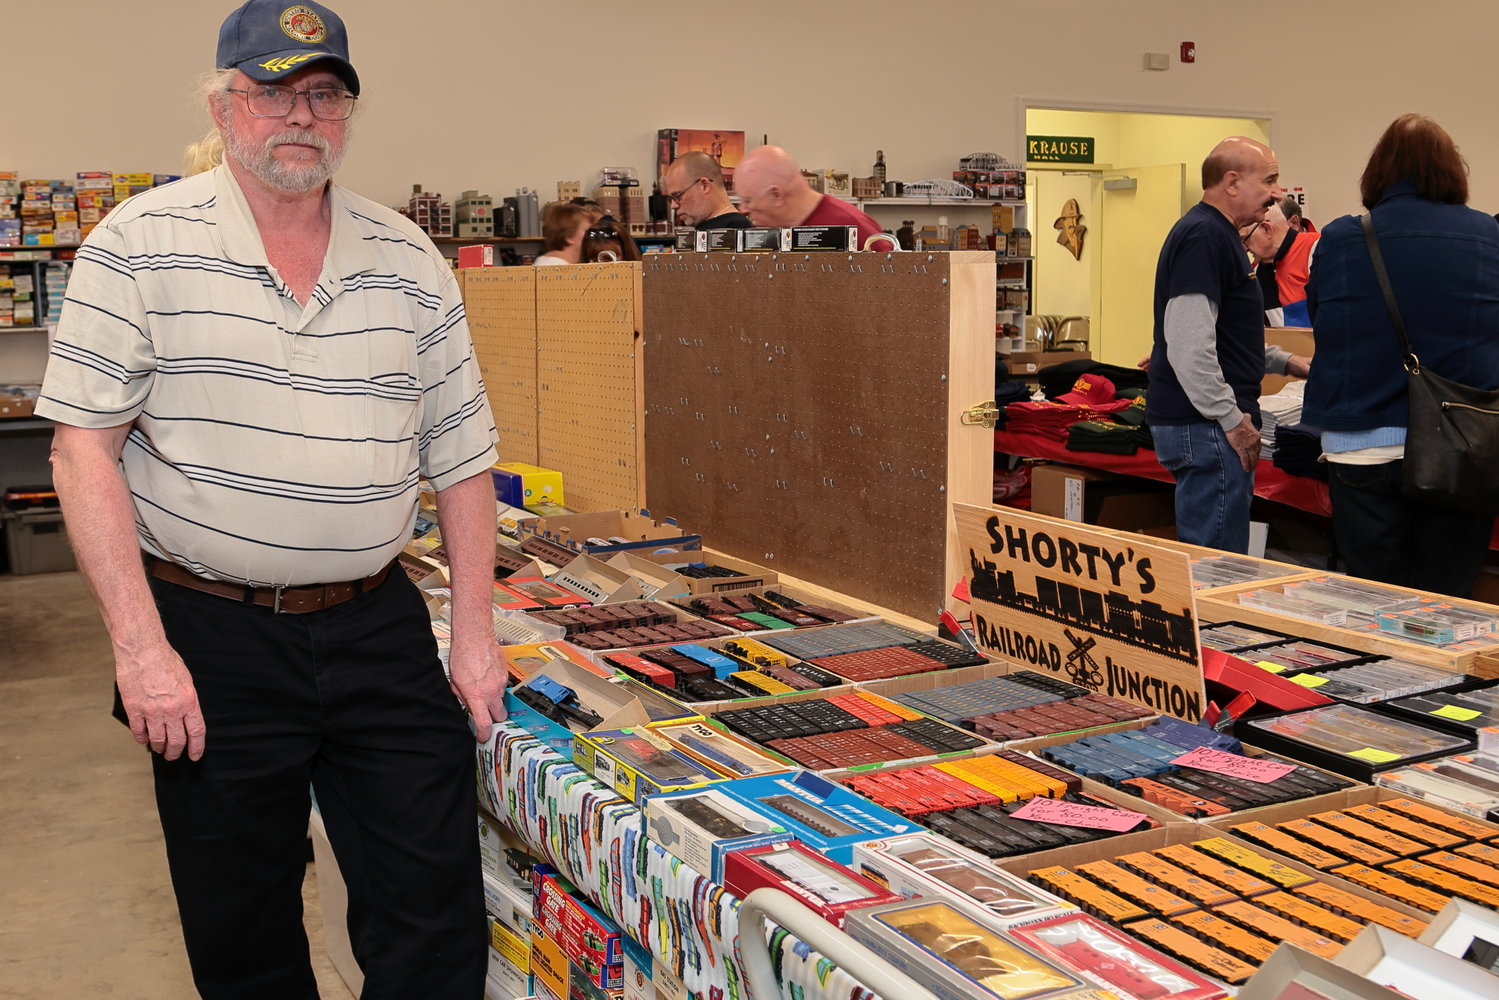 Gary W. “Shorty” Leech Jr. from Millmont, PA, had some of his wares on display. Shorty has been doing shows since 2010 and specializes in HO and N gauge trains. He said he is one of a few that still work with brass repairs, and that he rode a real train to high school.